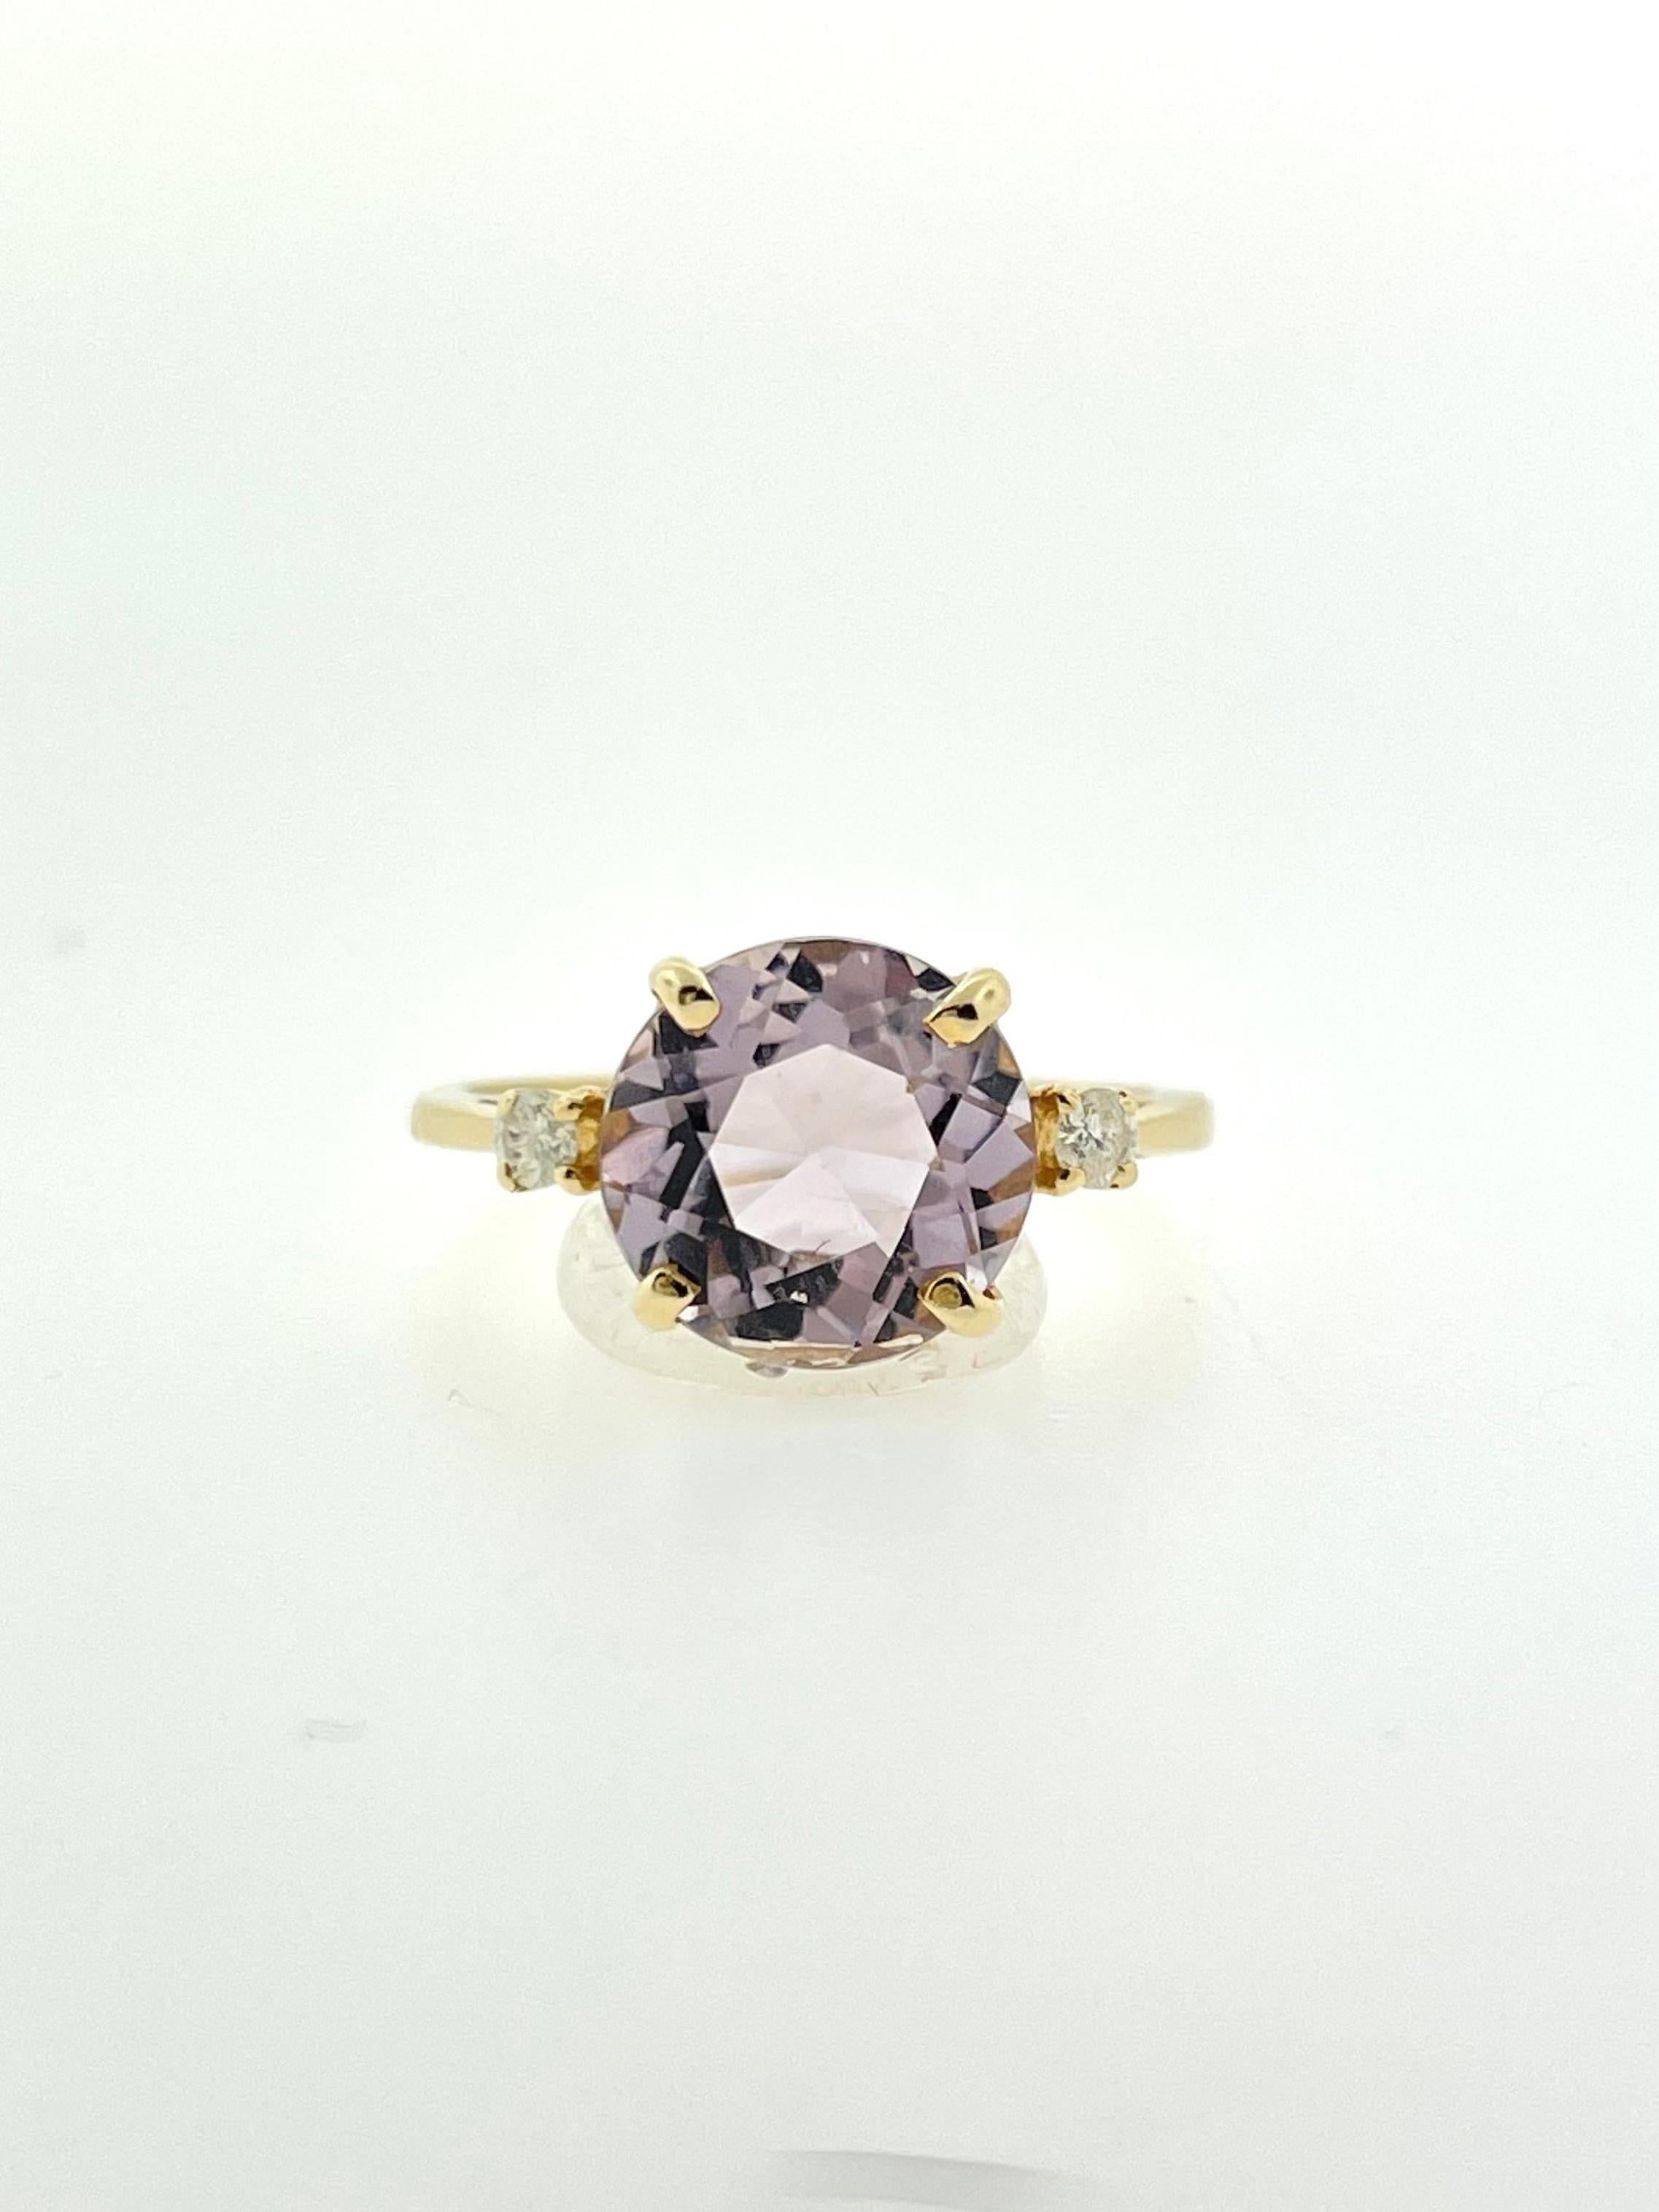 A light-colored round amethyst with two adorning round bright diamonds all set in yellow gold, a beautiful piece for anyone! 